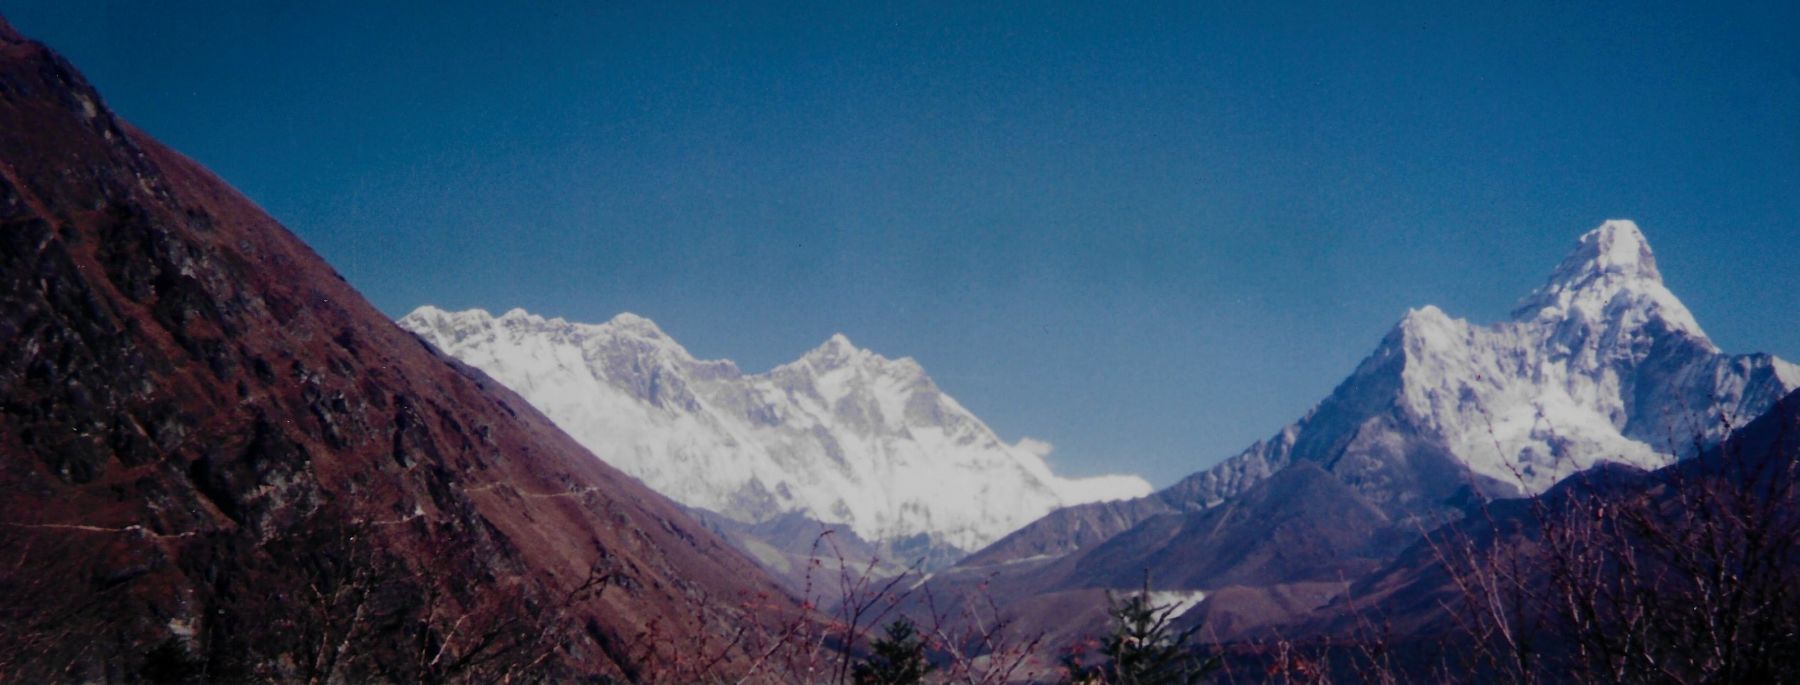 Everest and ama dablam mountains